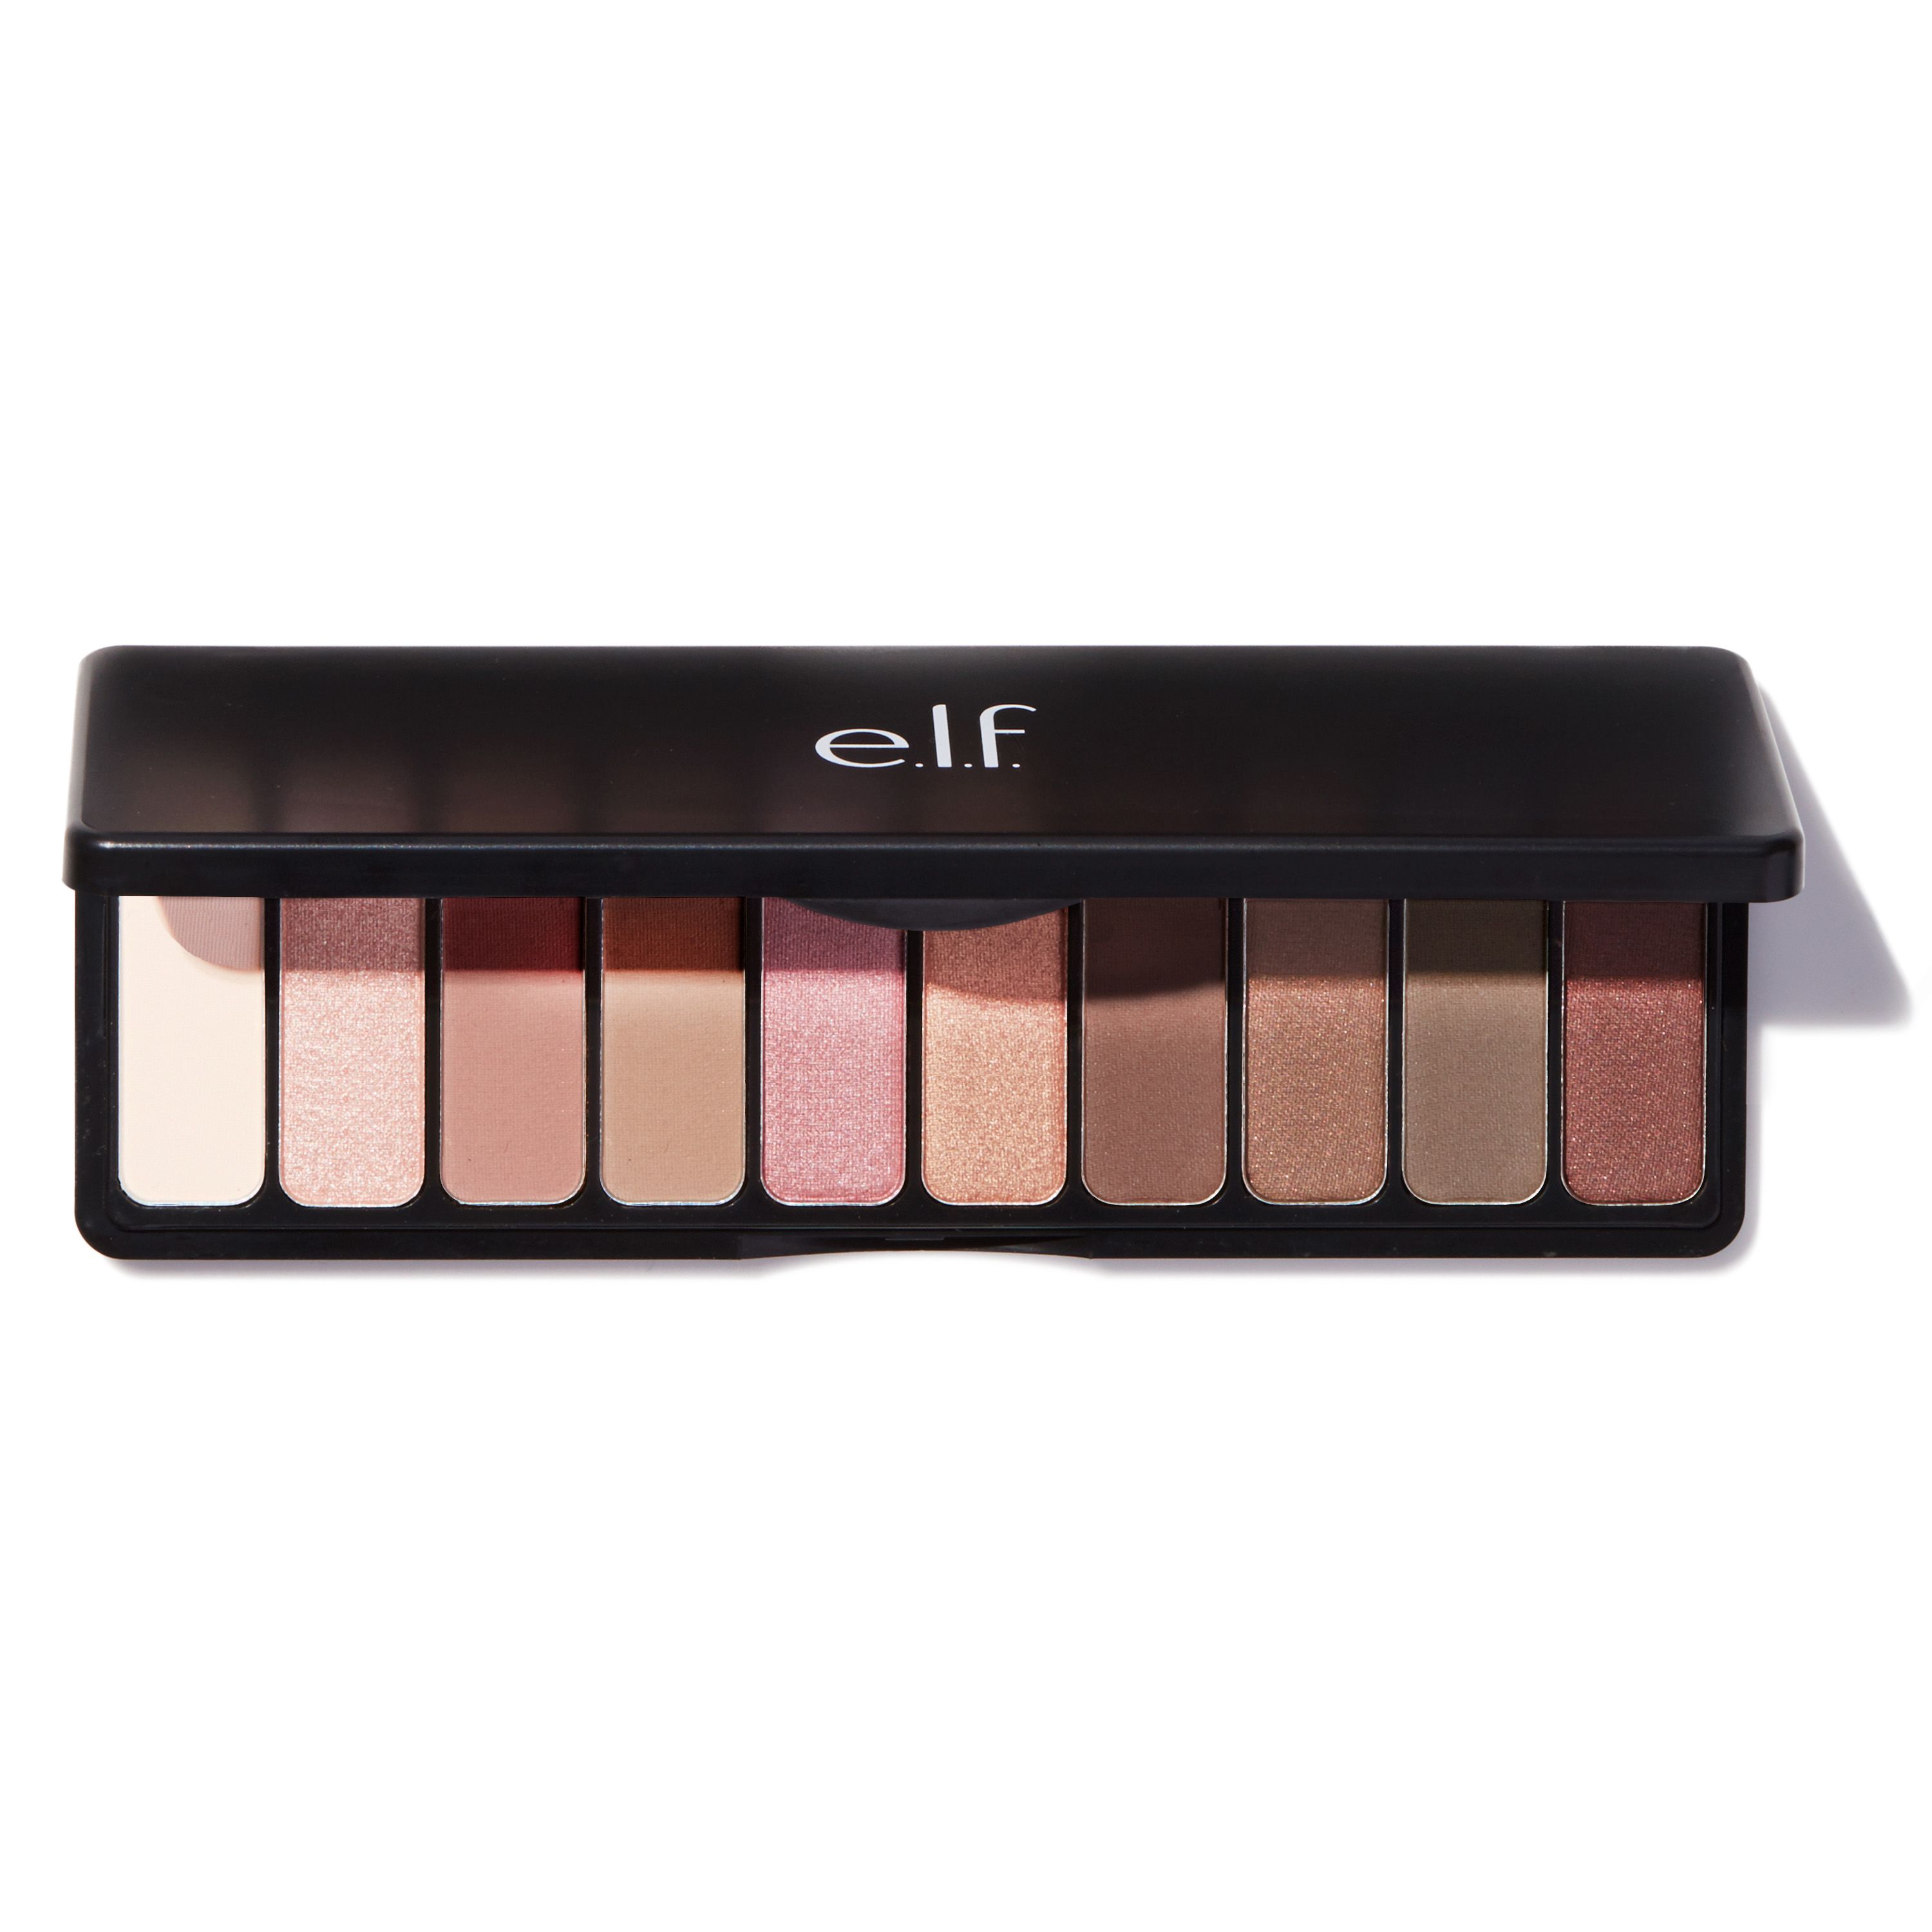 Rose Gold Eyeshadow Palette - Nude Rose Gold | e.l.f. Cosmetics ...